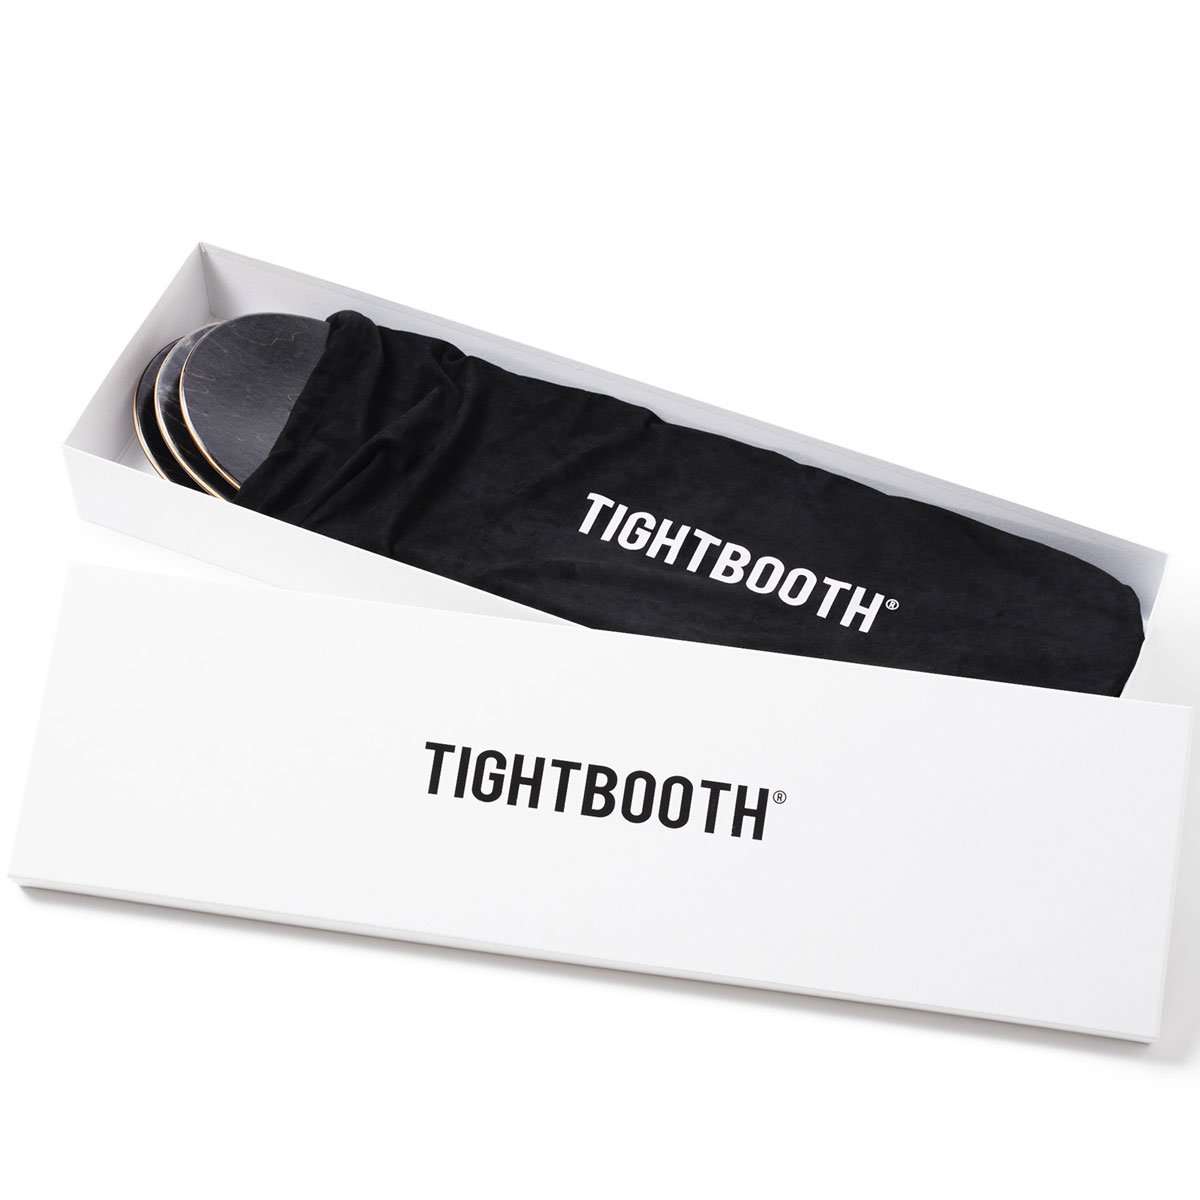 Tightbooth